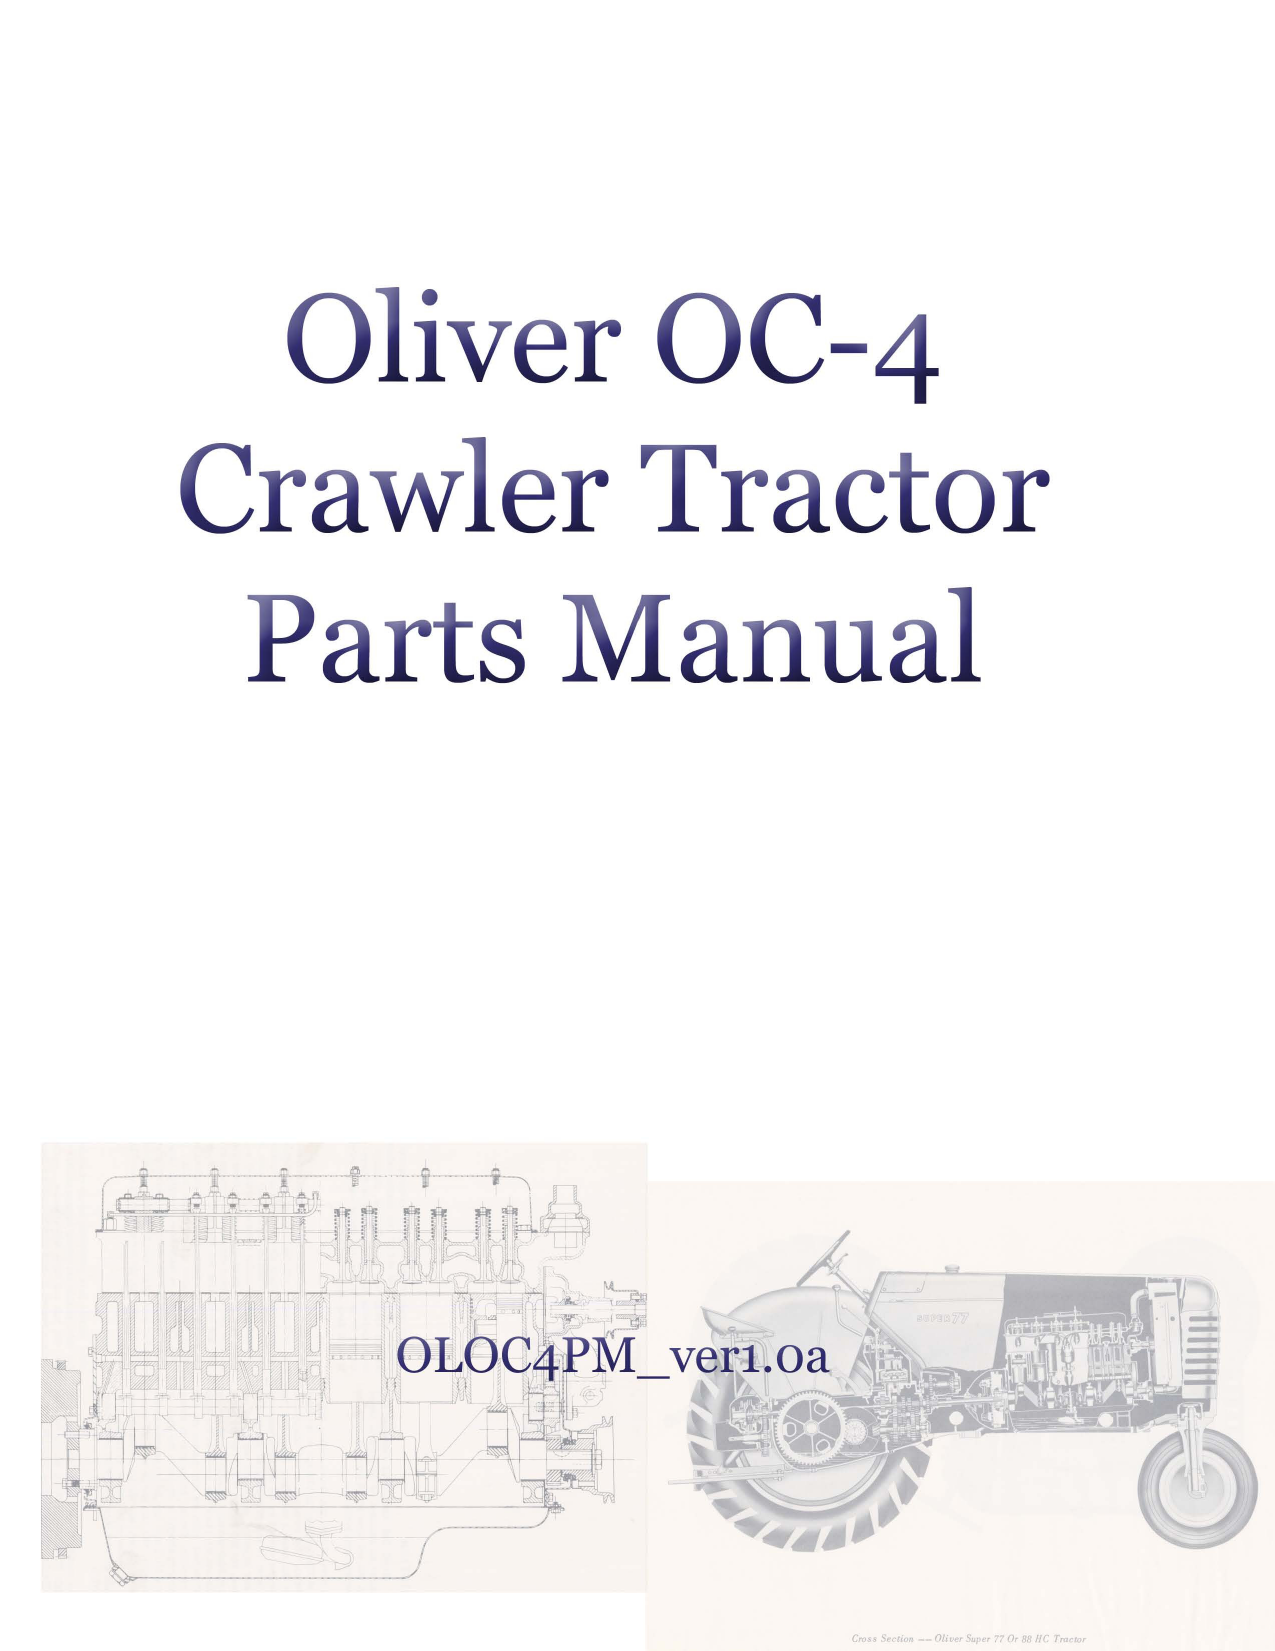  1955-1974 Oliver OC-4 crawler tractor/dozer parts manual Preview image 6